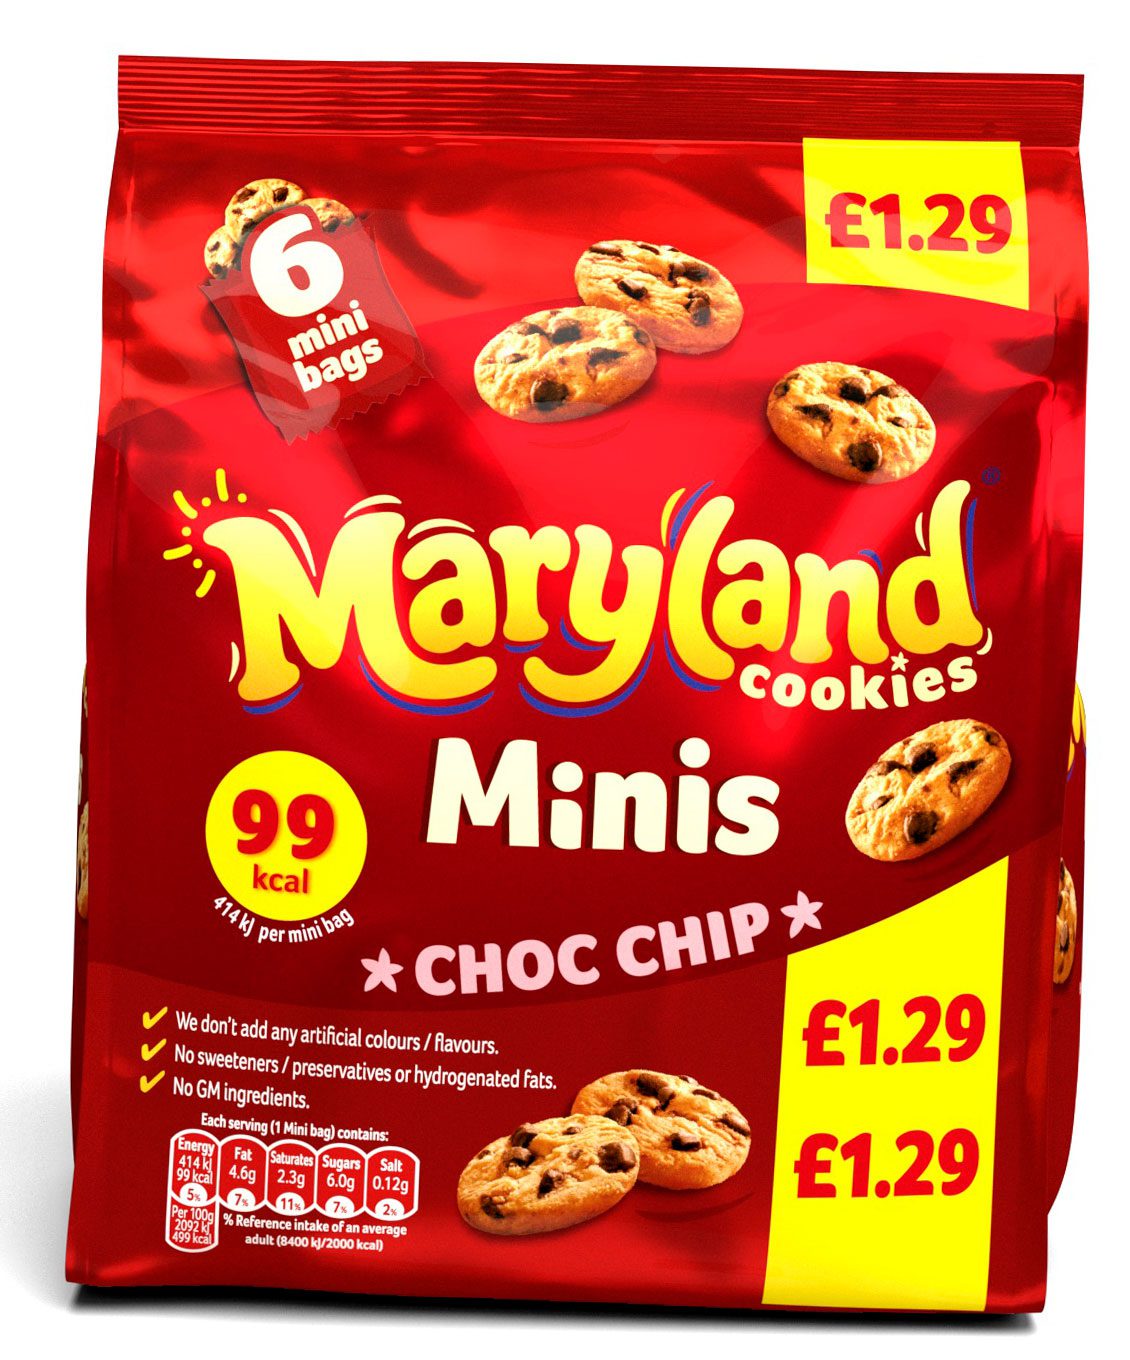 The Maryland Choc Chip Minis PMP contains six small bags.